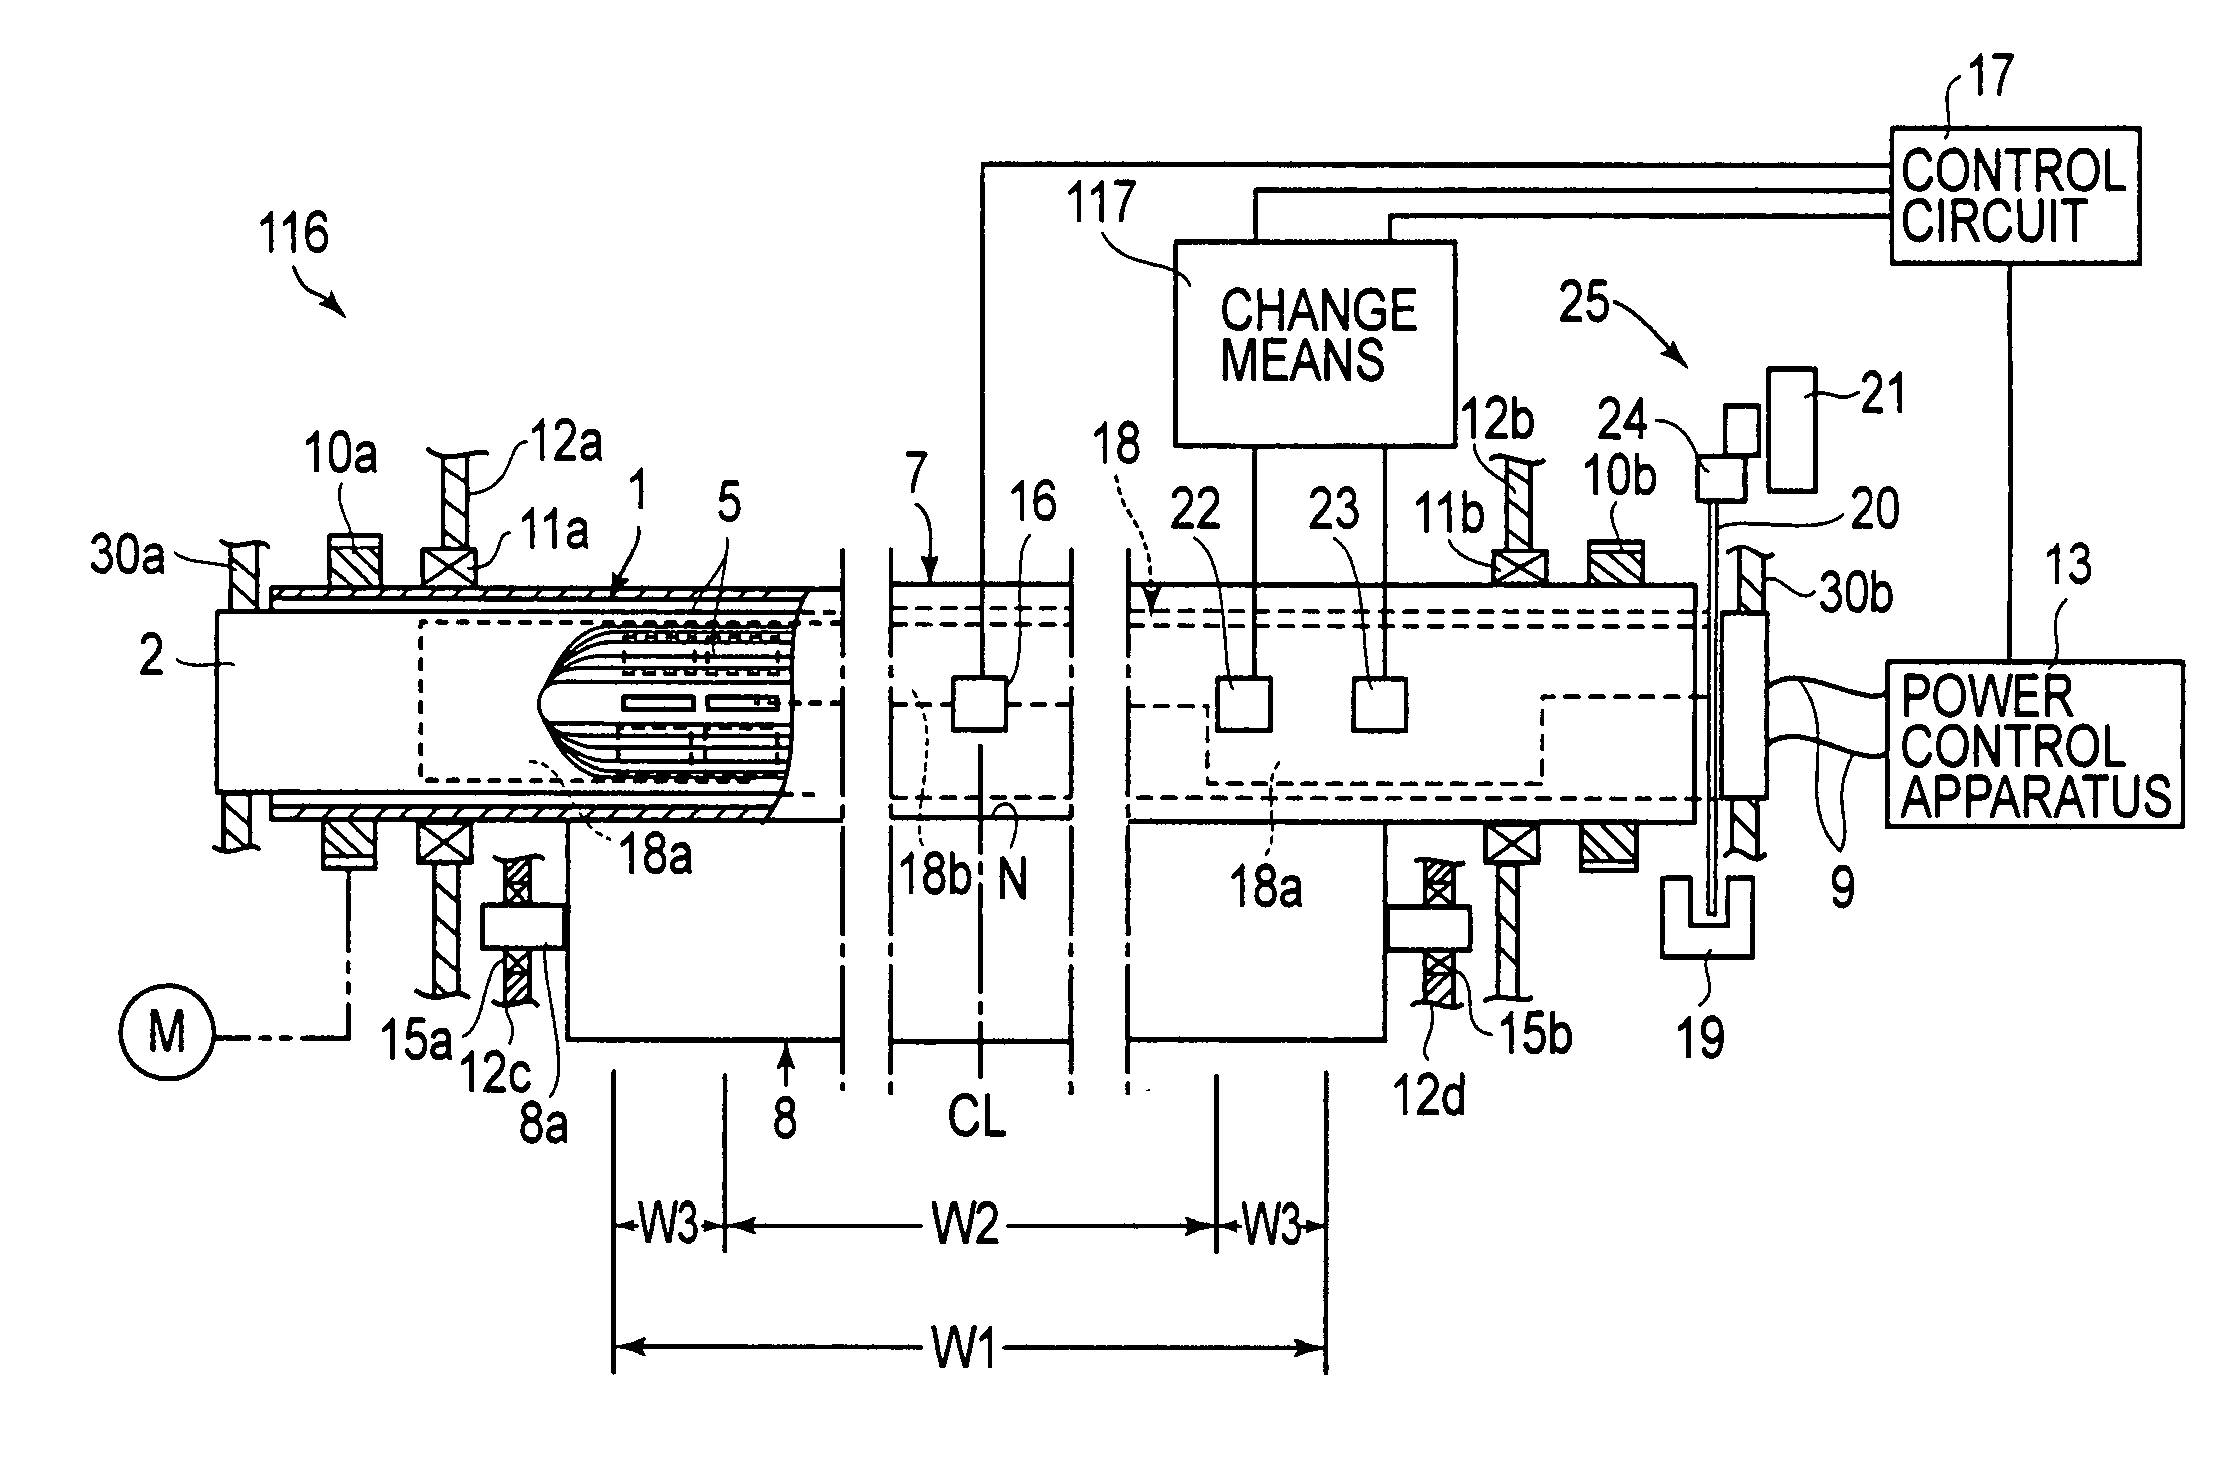 Heating apparatus with target temperature control and means for changing target temperature